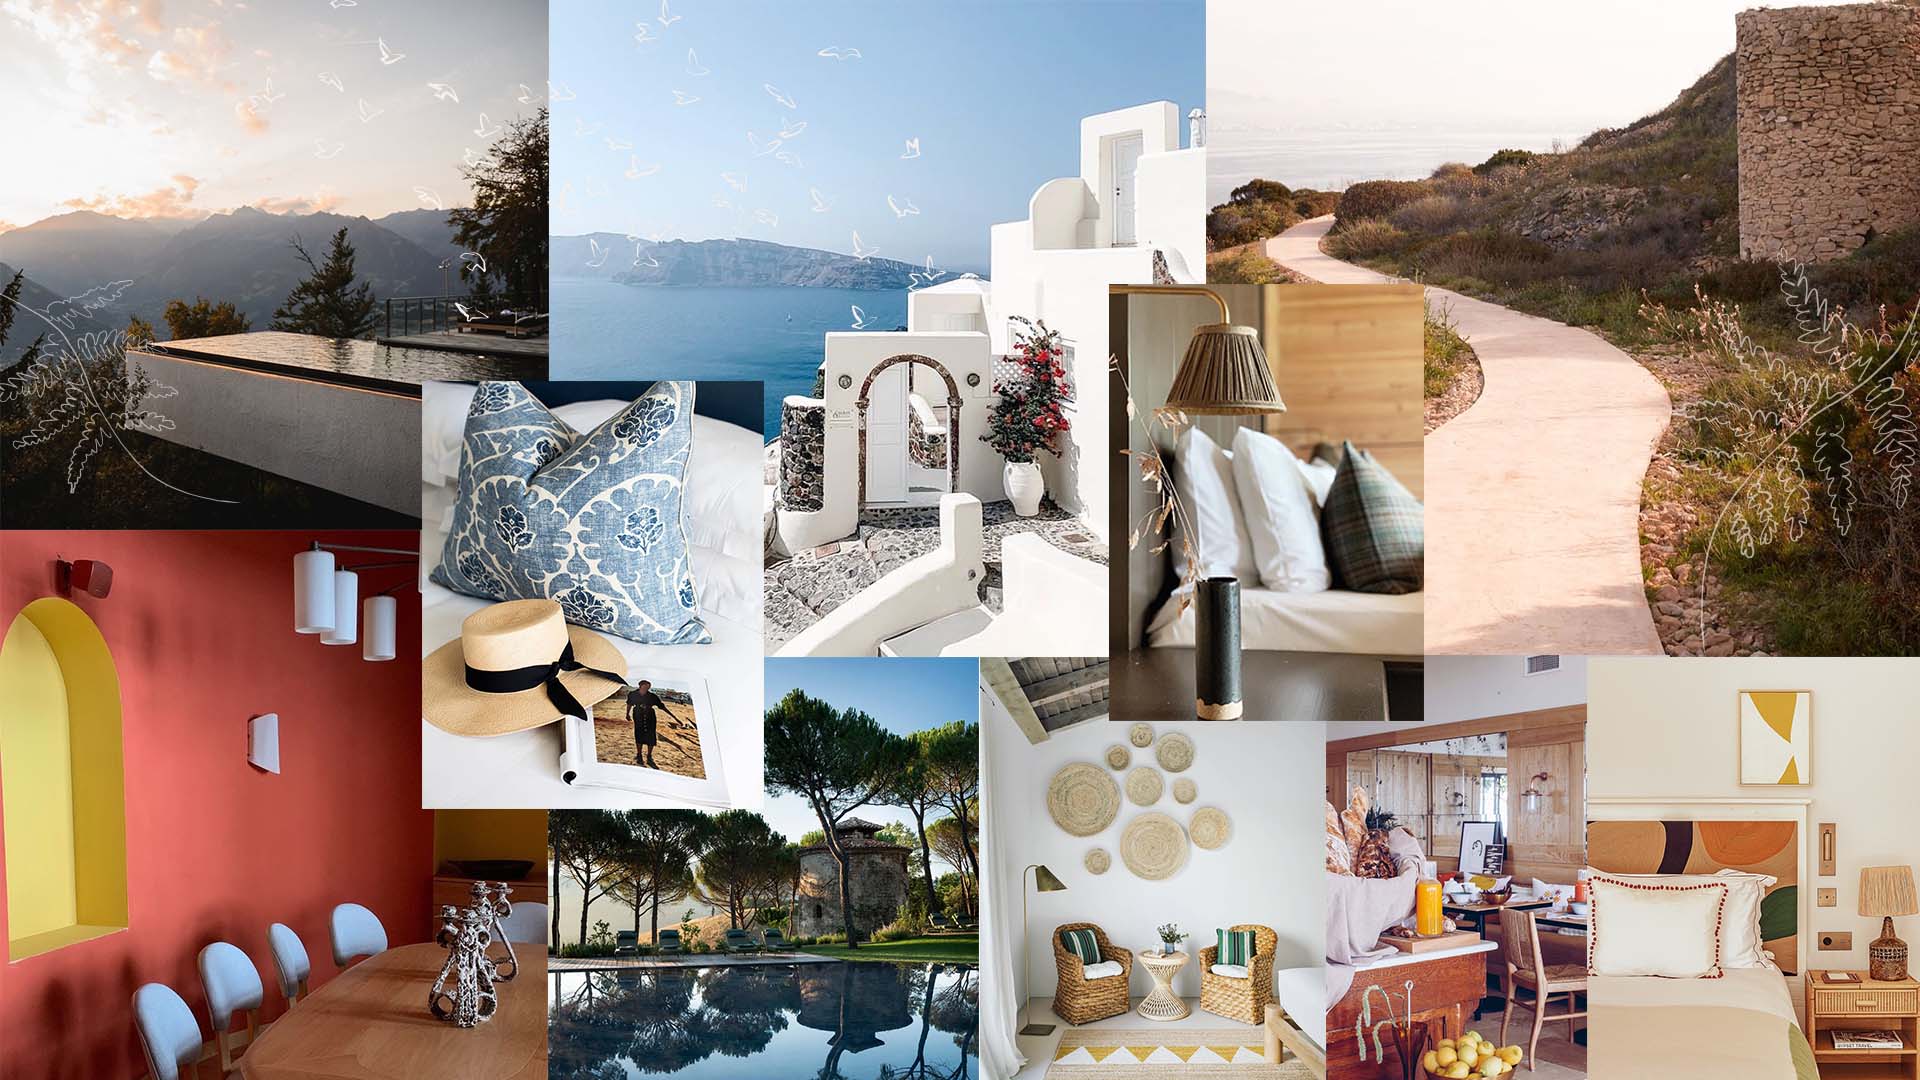 Picture Perfect: 10 of the world’s most Instagrammable boutique hotels